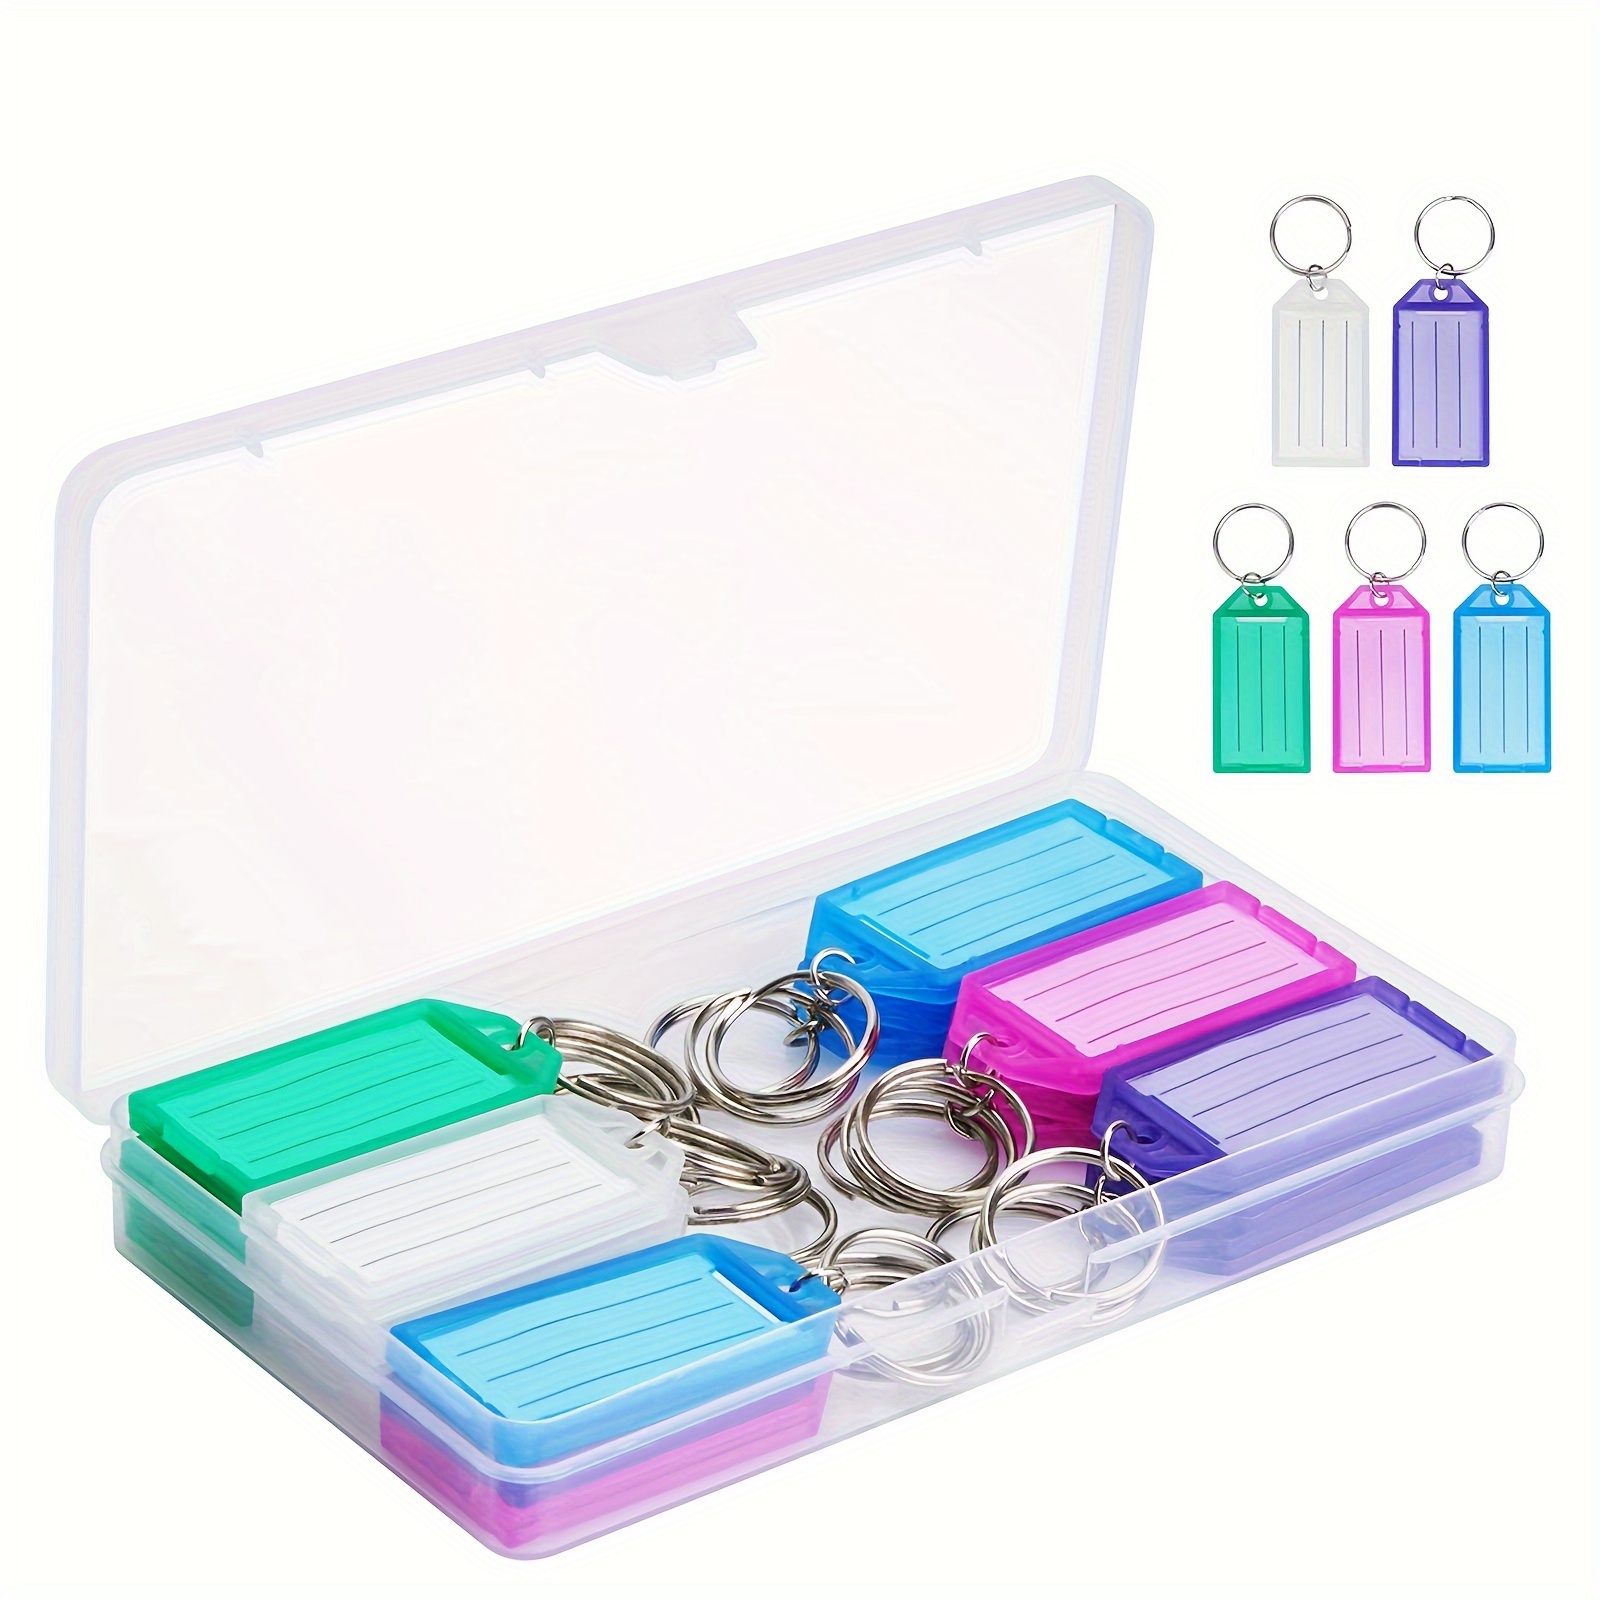 

20-piece Assorted Colors Key Tags - Durable Pp Plastic Key Ring Labels For Backpacks, Fobs, Mailboxes & More - Ideal For Identification, Storage & Organization